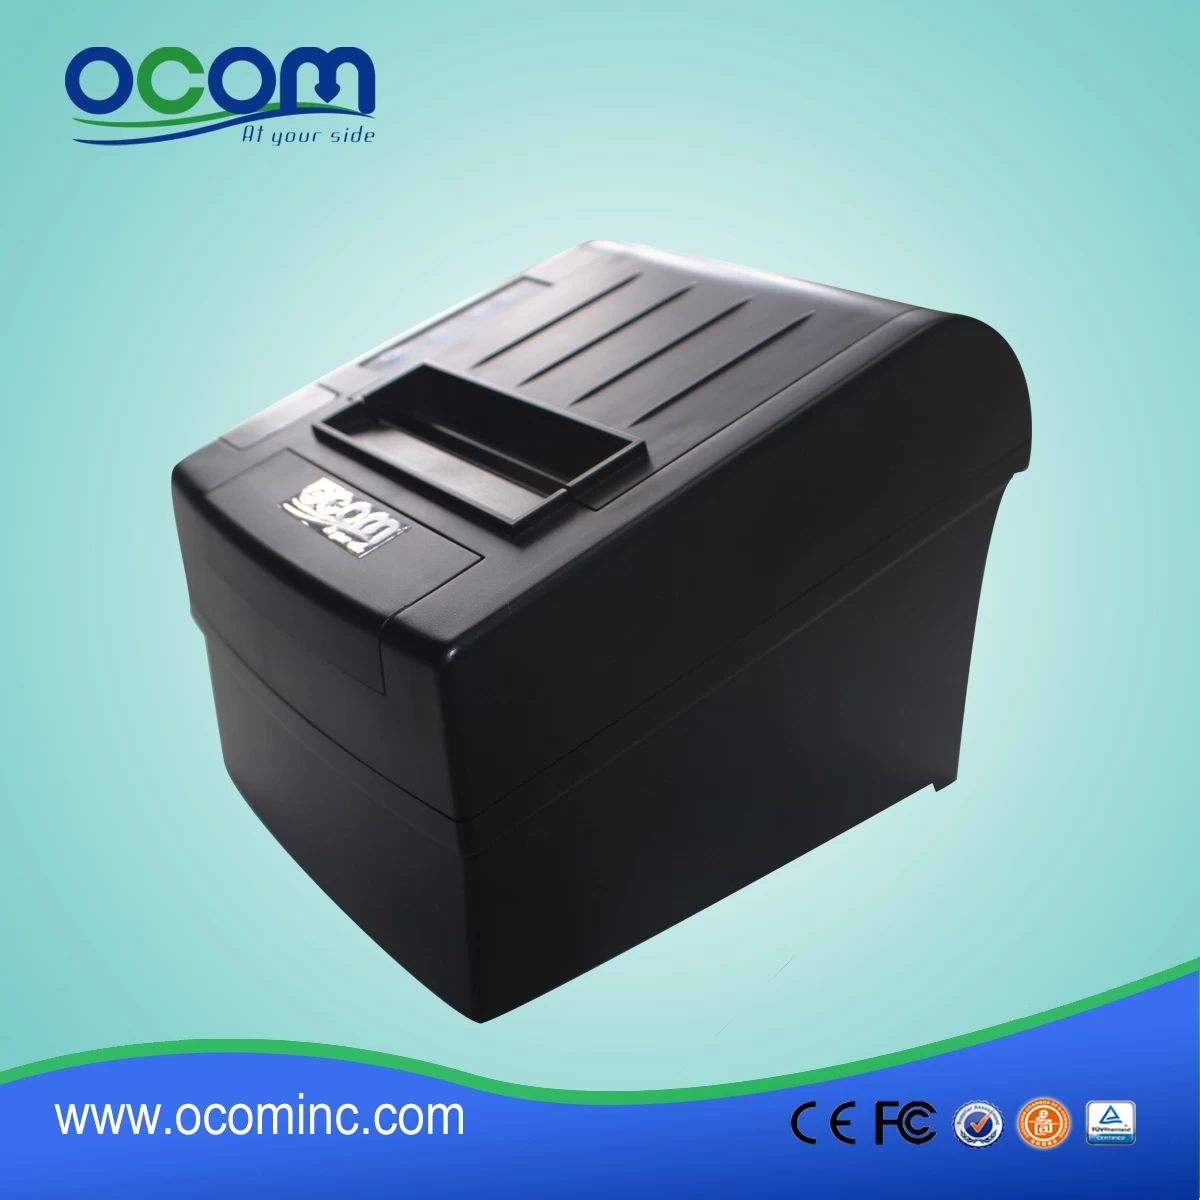 Pos Printer with 80mm thermal paper OCPP-806